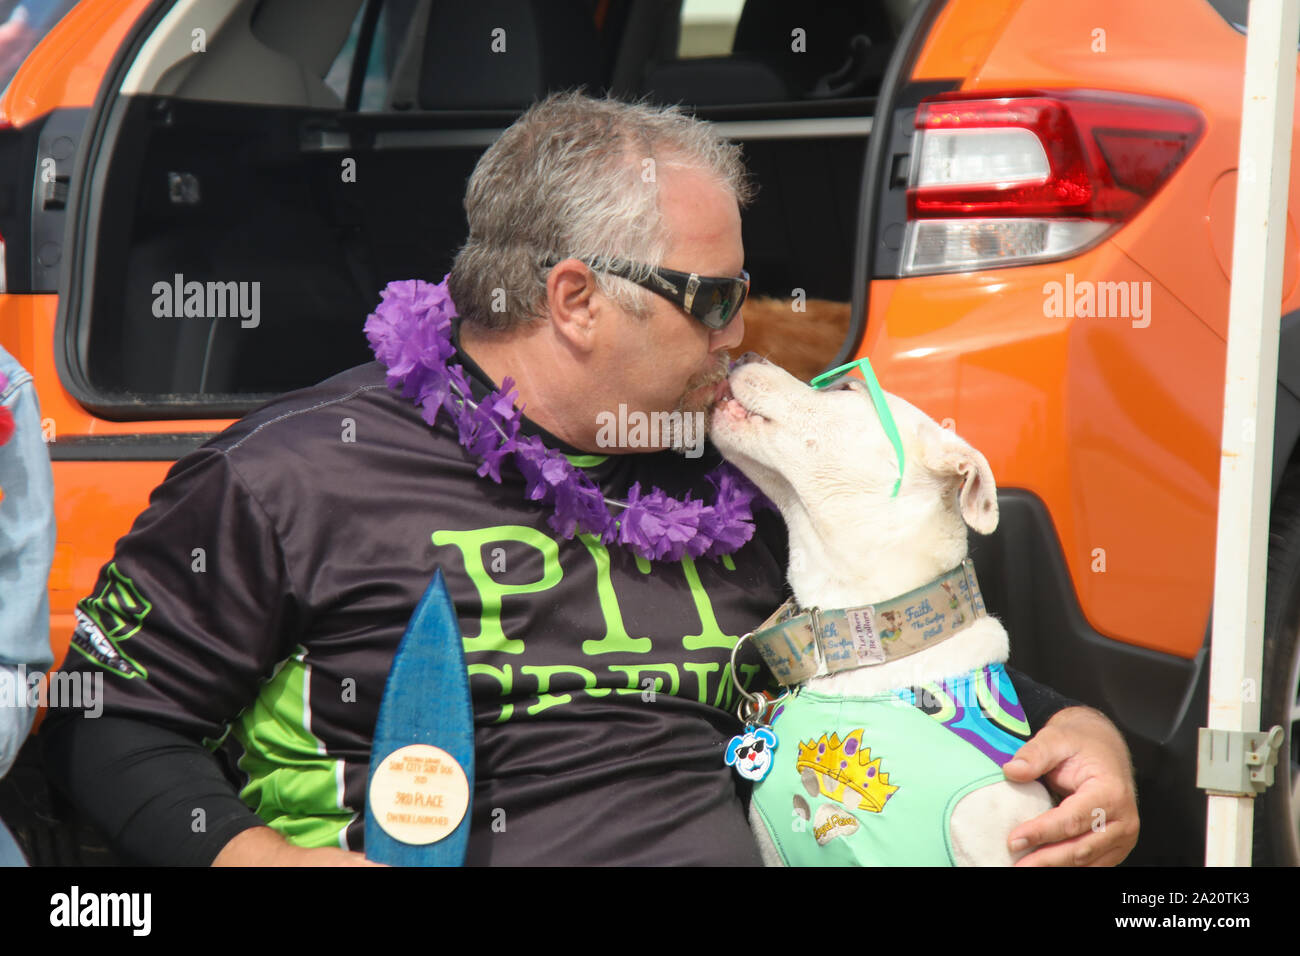 Huntington Beach, California, USA. 28th September, 2019. James Wall gets a 'kiss' from his dog Faith, an American Pitbull Terrier, as they are awarded 3rd Place in the Owner-Launched Division at the 11th Annual Surf City Surf Dog Competition held at Huntington Dog Beach in Huntington Beach, California on September 28, 2019. Stock Photo